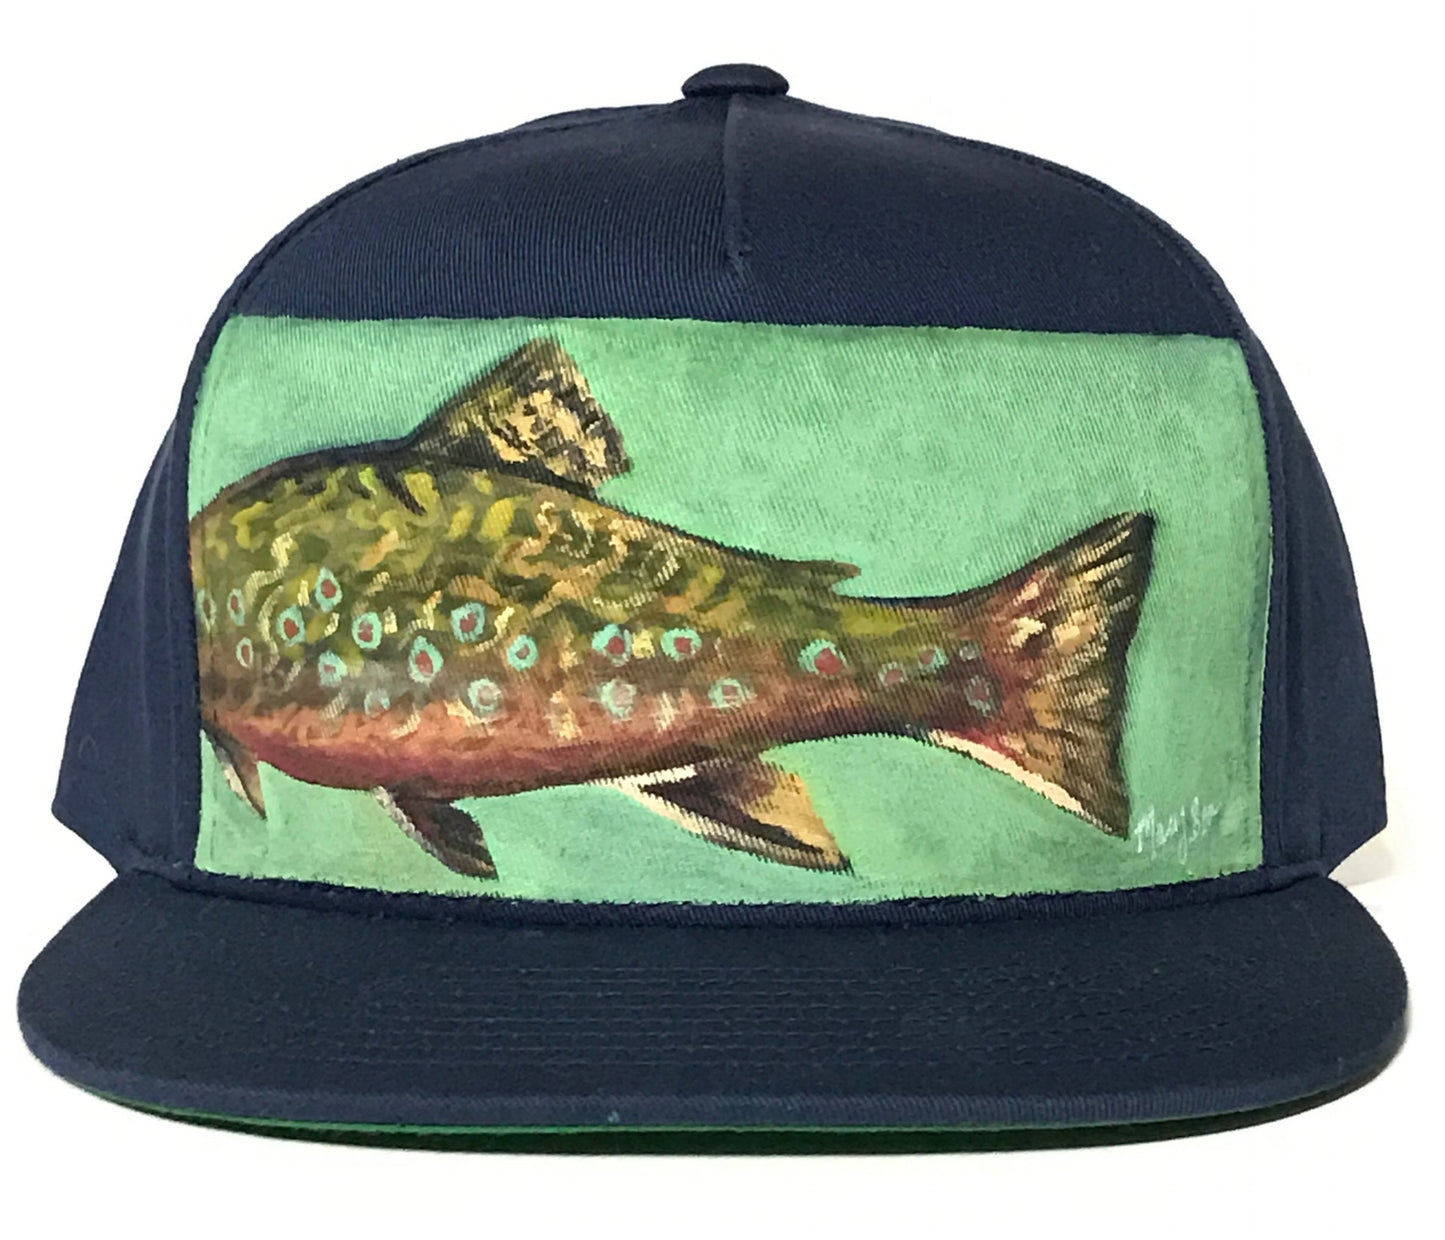 "Fish Tale" Hand Painted on Blue Snapback Fabric Back Hat